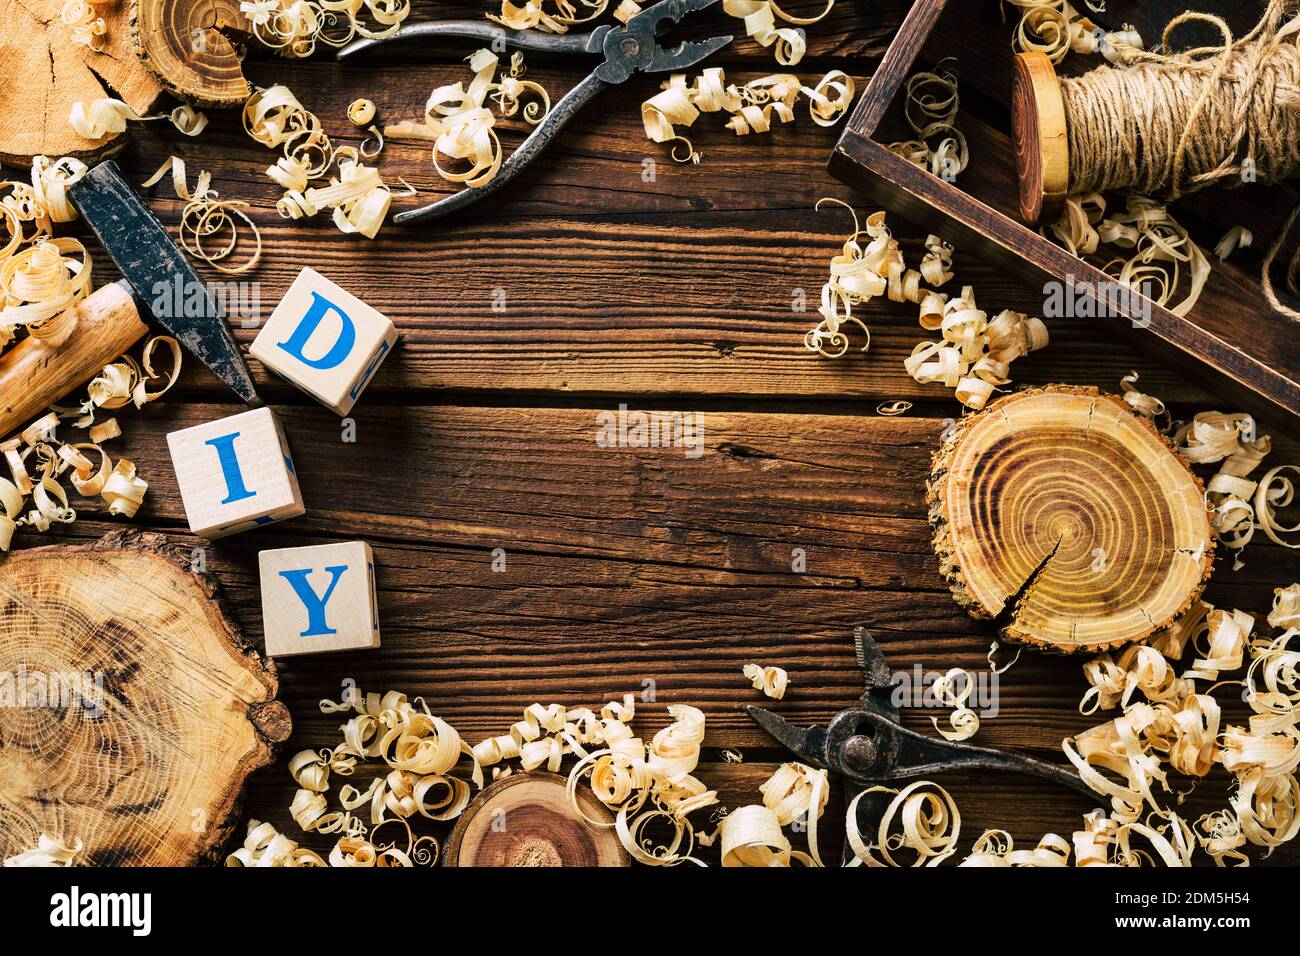 DIY wood. Woodworking workshop. Wood shavings and carpentry tools. background Stock Photo